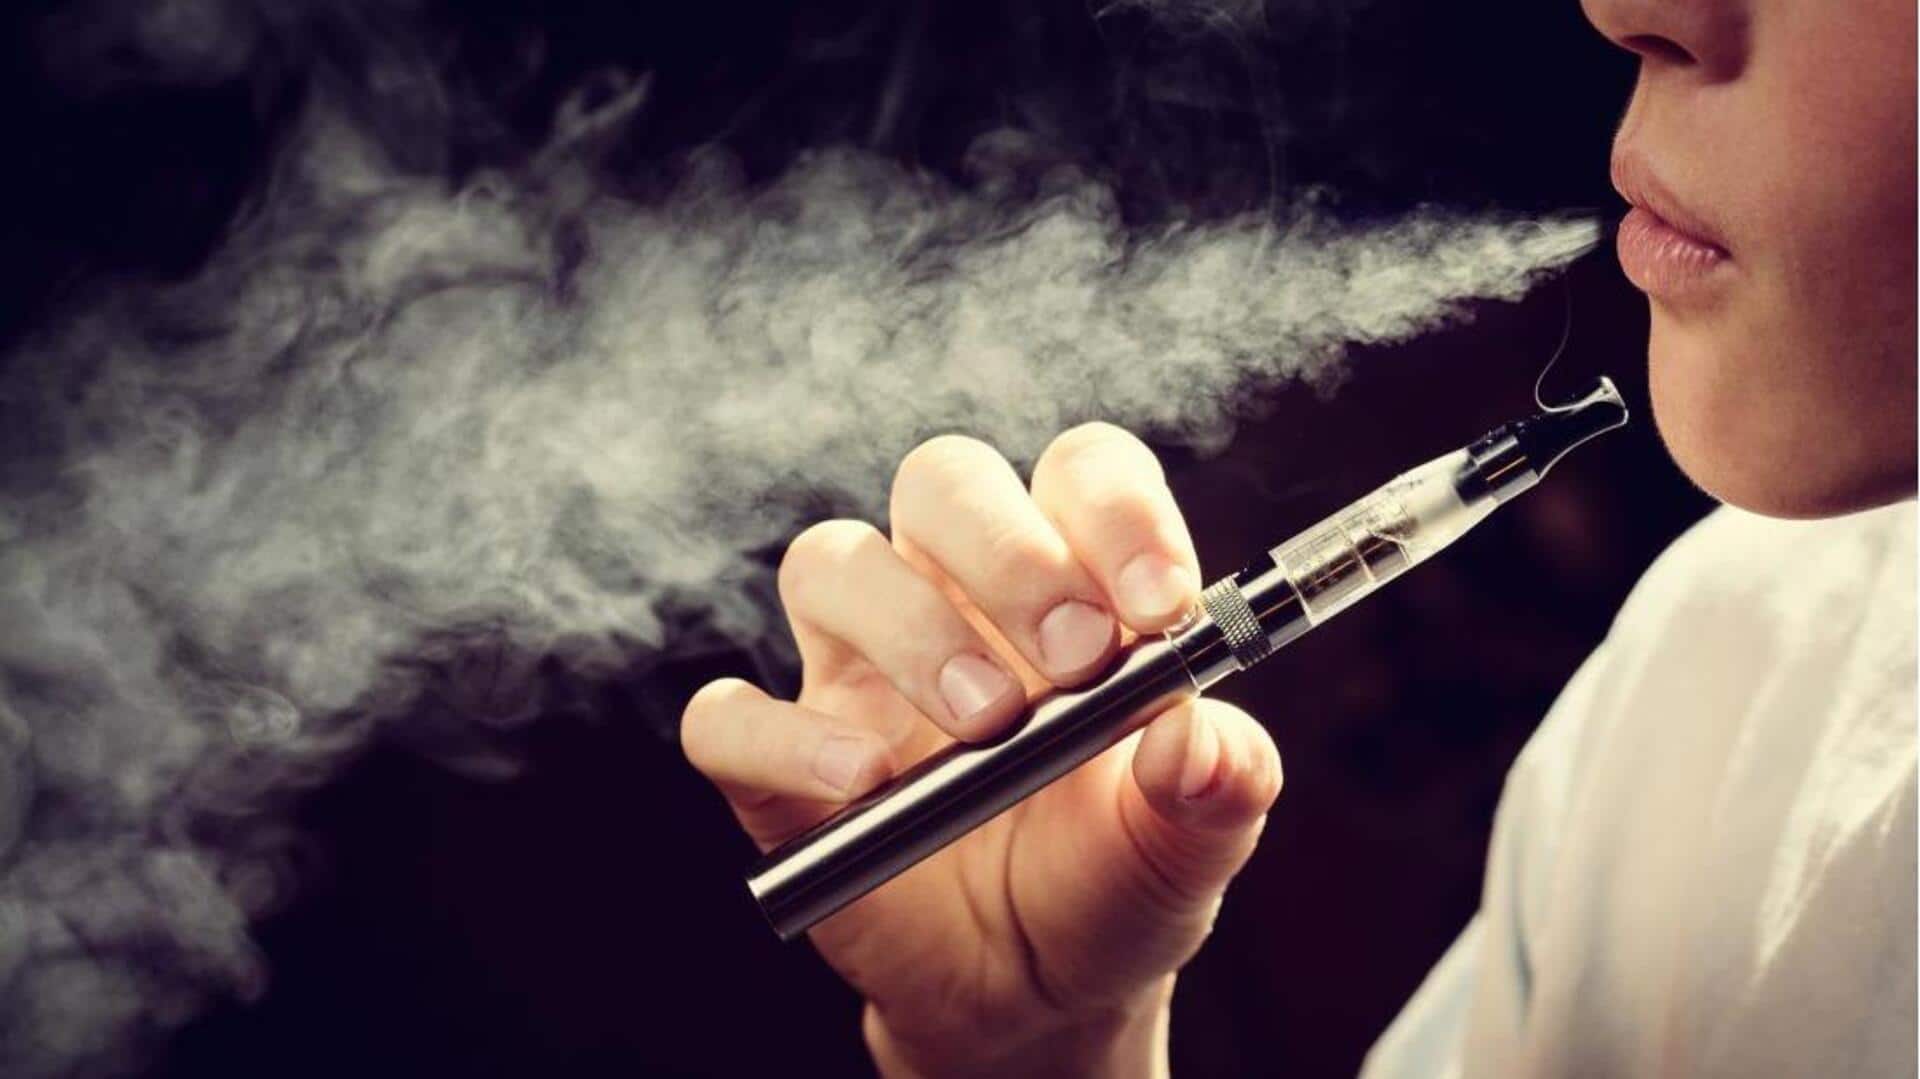 Study finds elevated uranium, lead levels in teen vapers